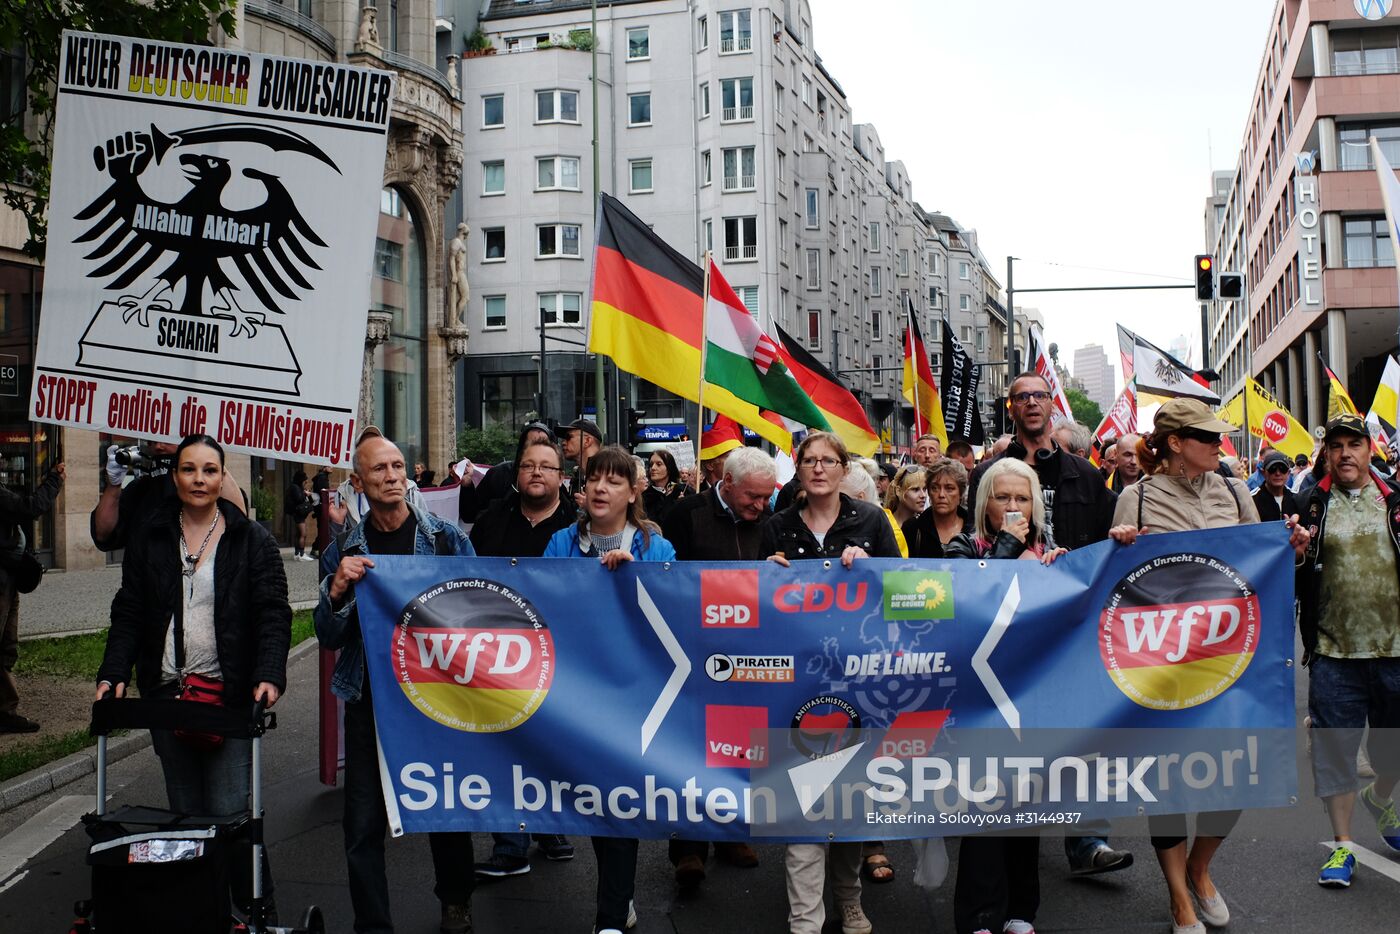 Protest rally in Berlin